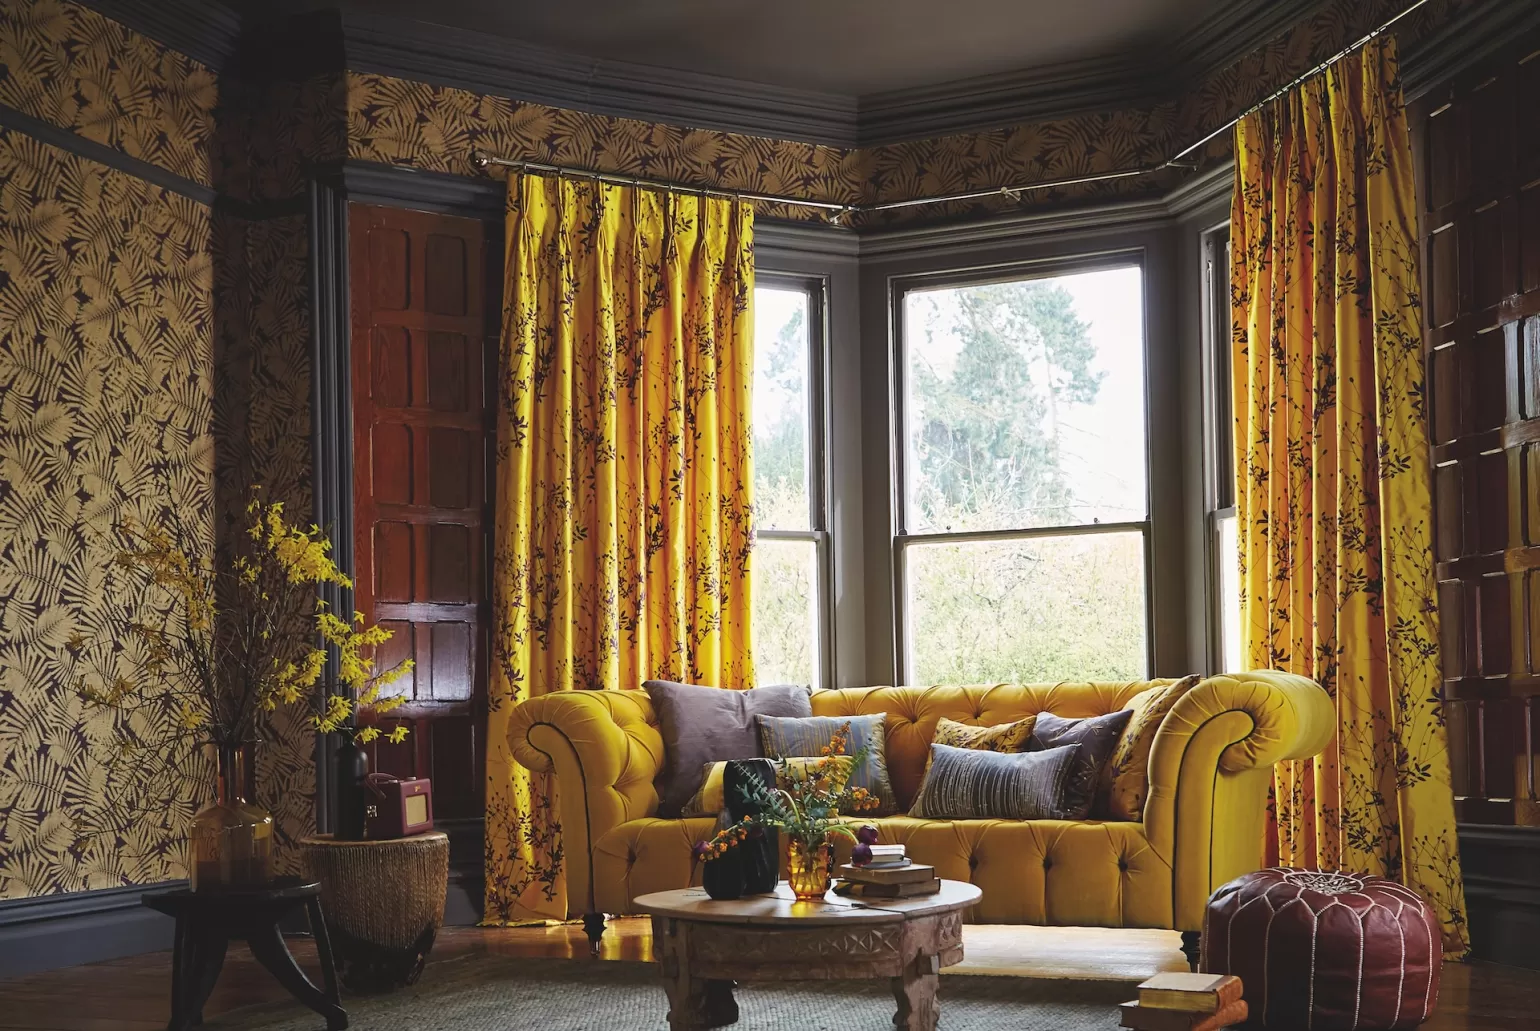 Whether you are looking for some inspiration or already have a vision in mind, our expert design knowledge of window furnishings can help advise and guide you to discovering an exquisite look for your home.
